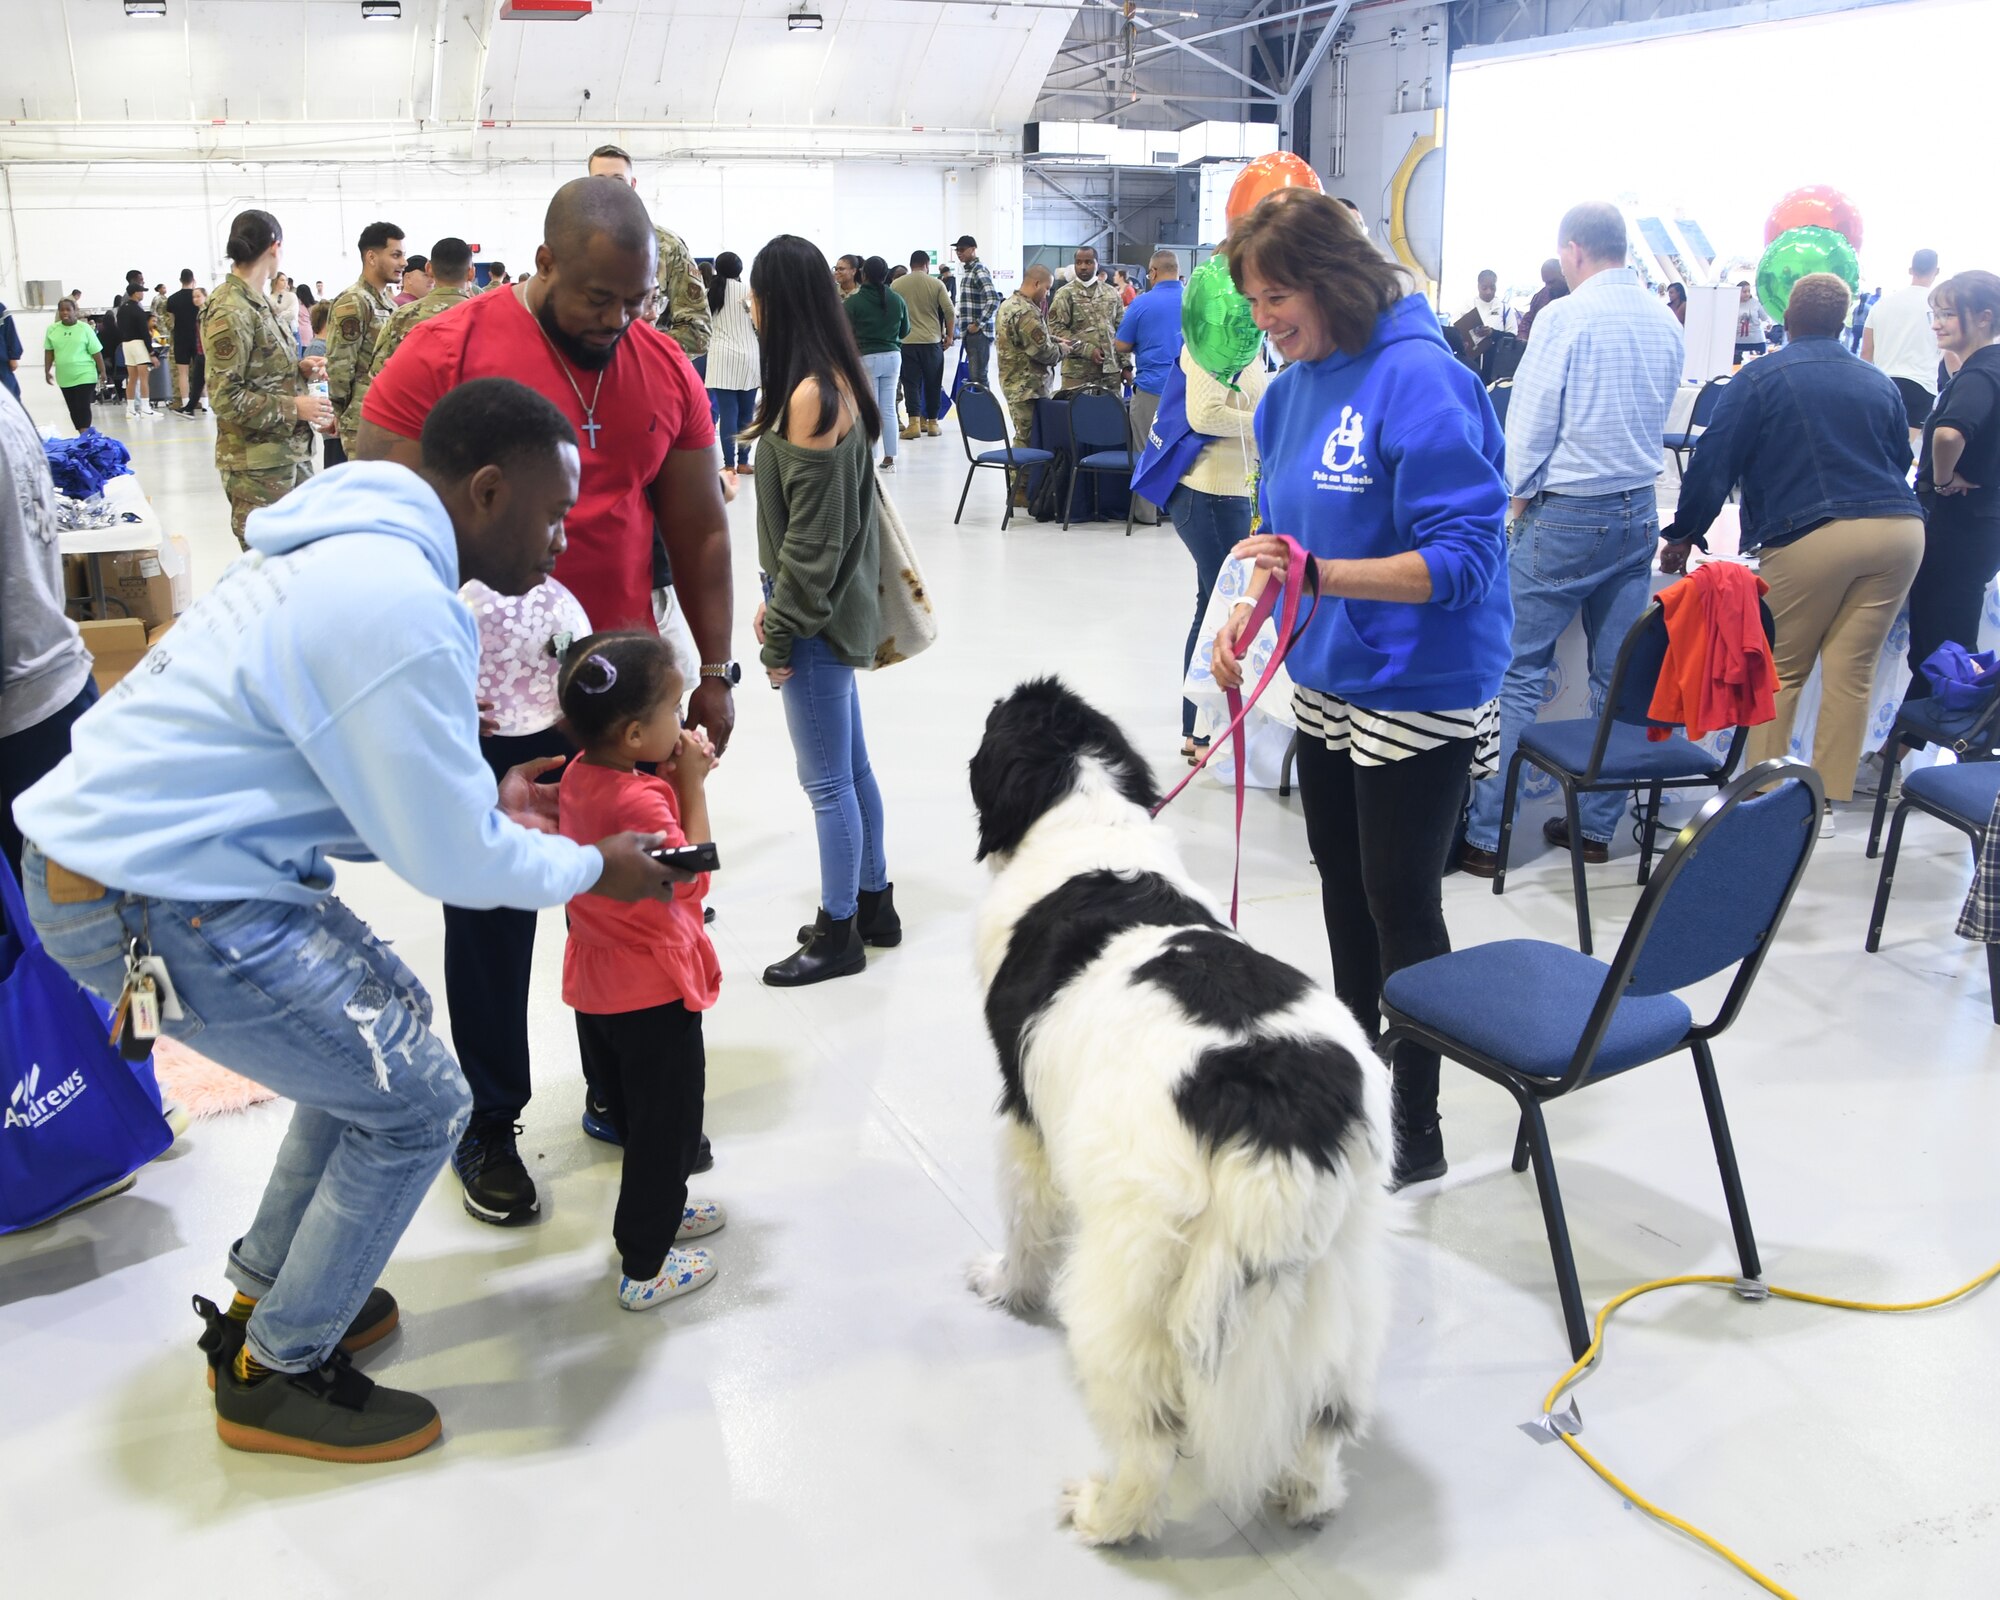 The 459th Air Refueling held its annual family day during the October 2022 UTA. The entire wing and the members families were permitted to participate in the morale event and were provided the rare opportunity to relax a bit and enjoy the various family-oriented activities and displays available. Numerous sponsors, participants, planners, and supporters made this event a success.